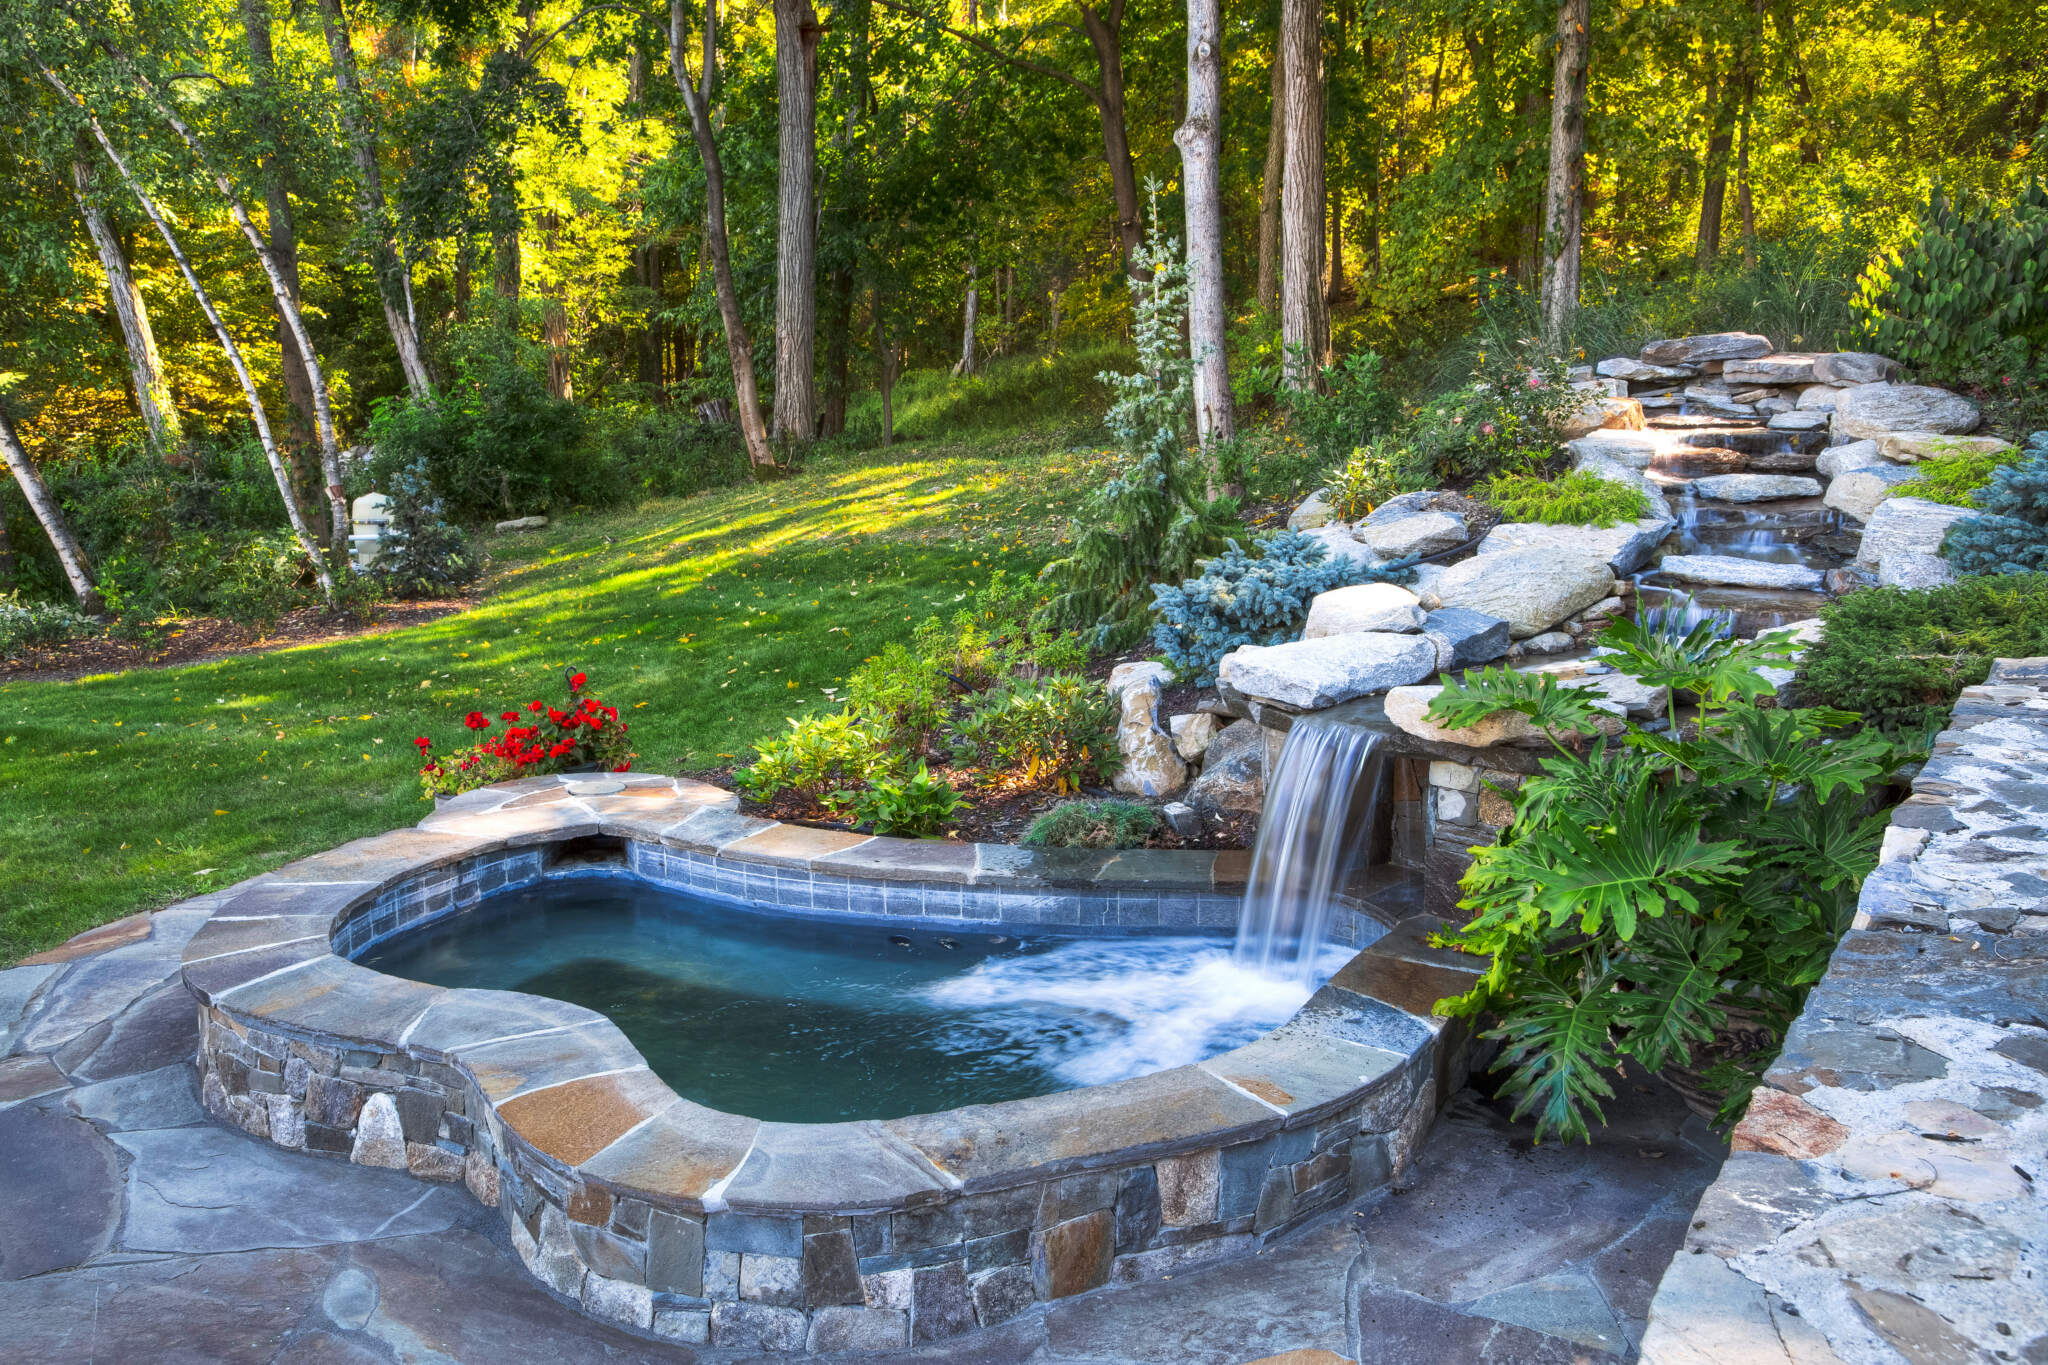 Neave Group's installation of streams bring a sense of calm and natural beauty to your property